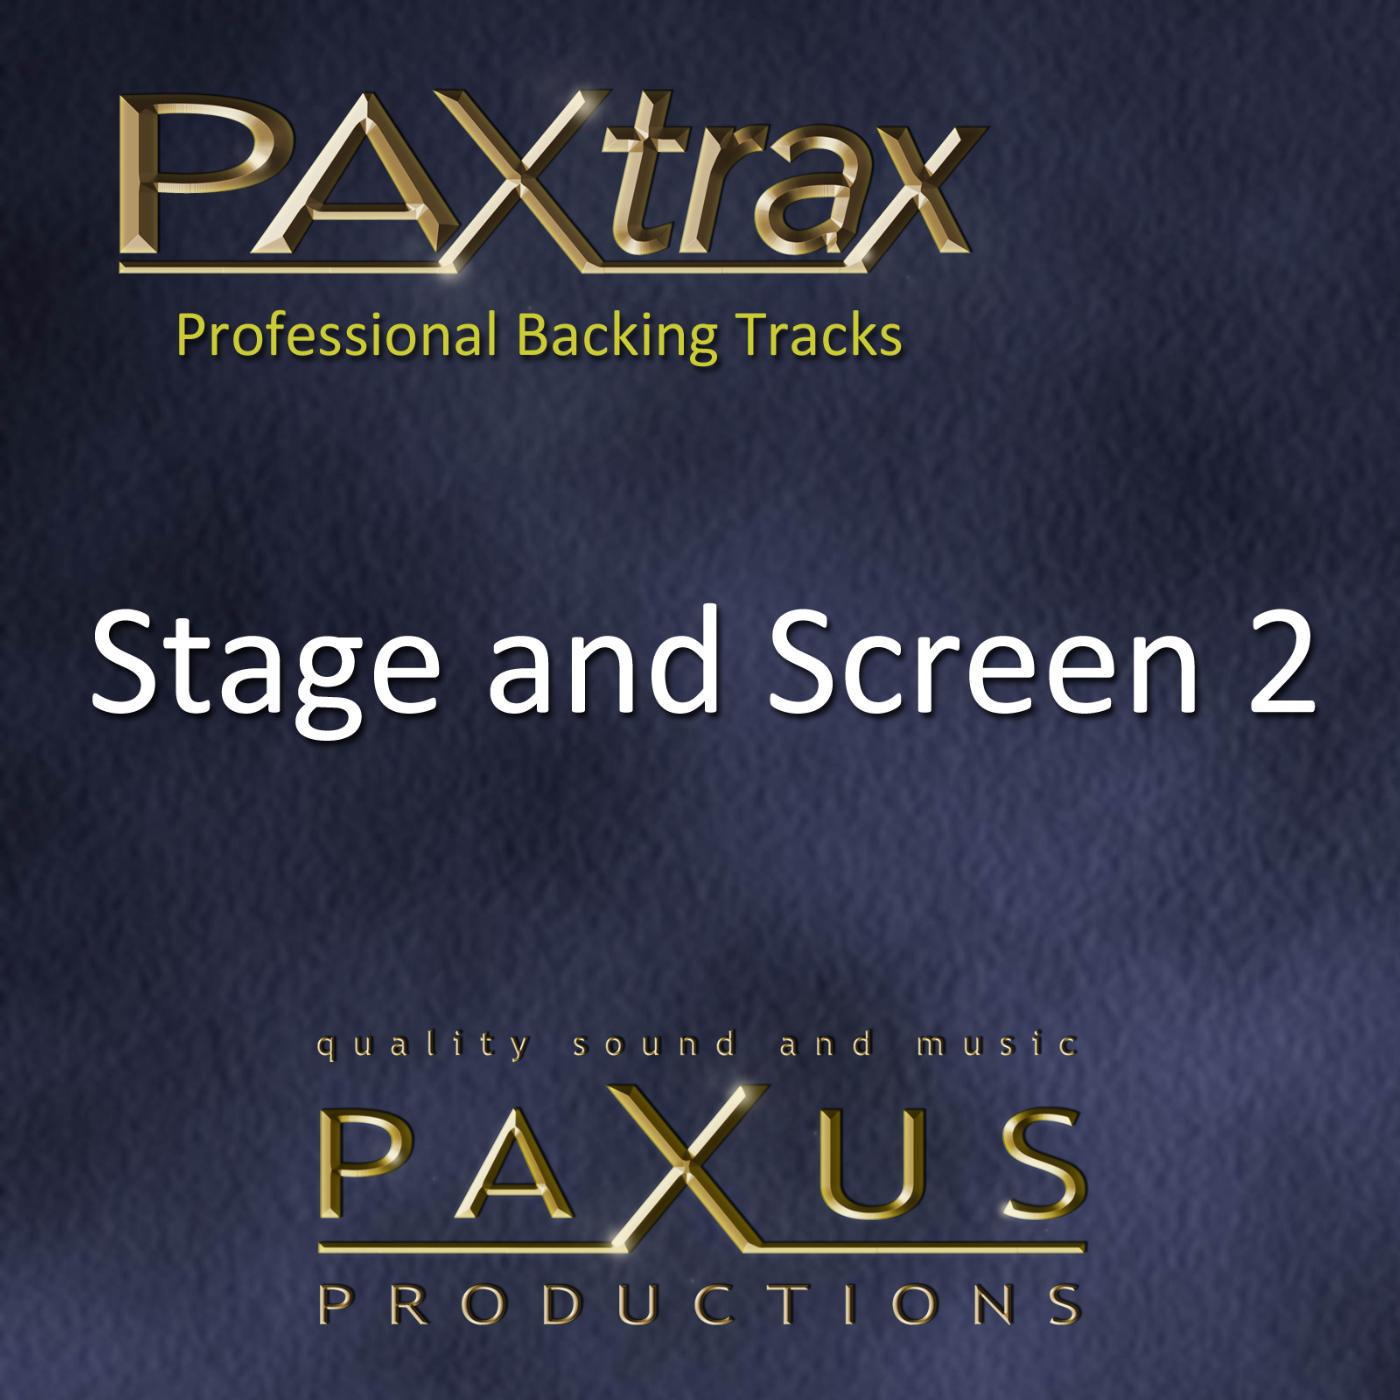 Постер альбома Paxtrax Professional Backing Tracks: Stage and Screen 2